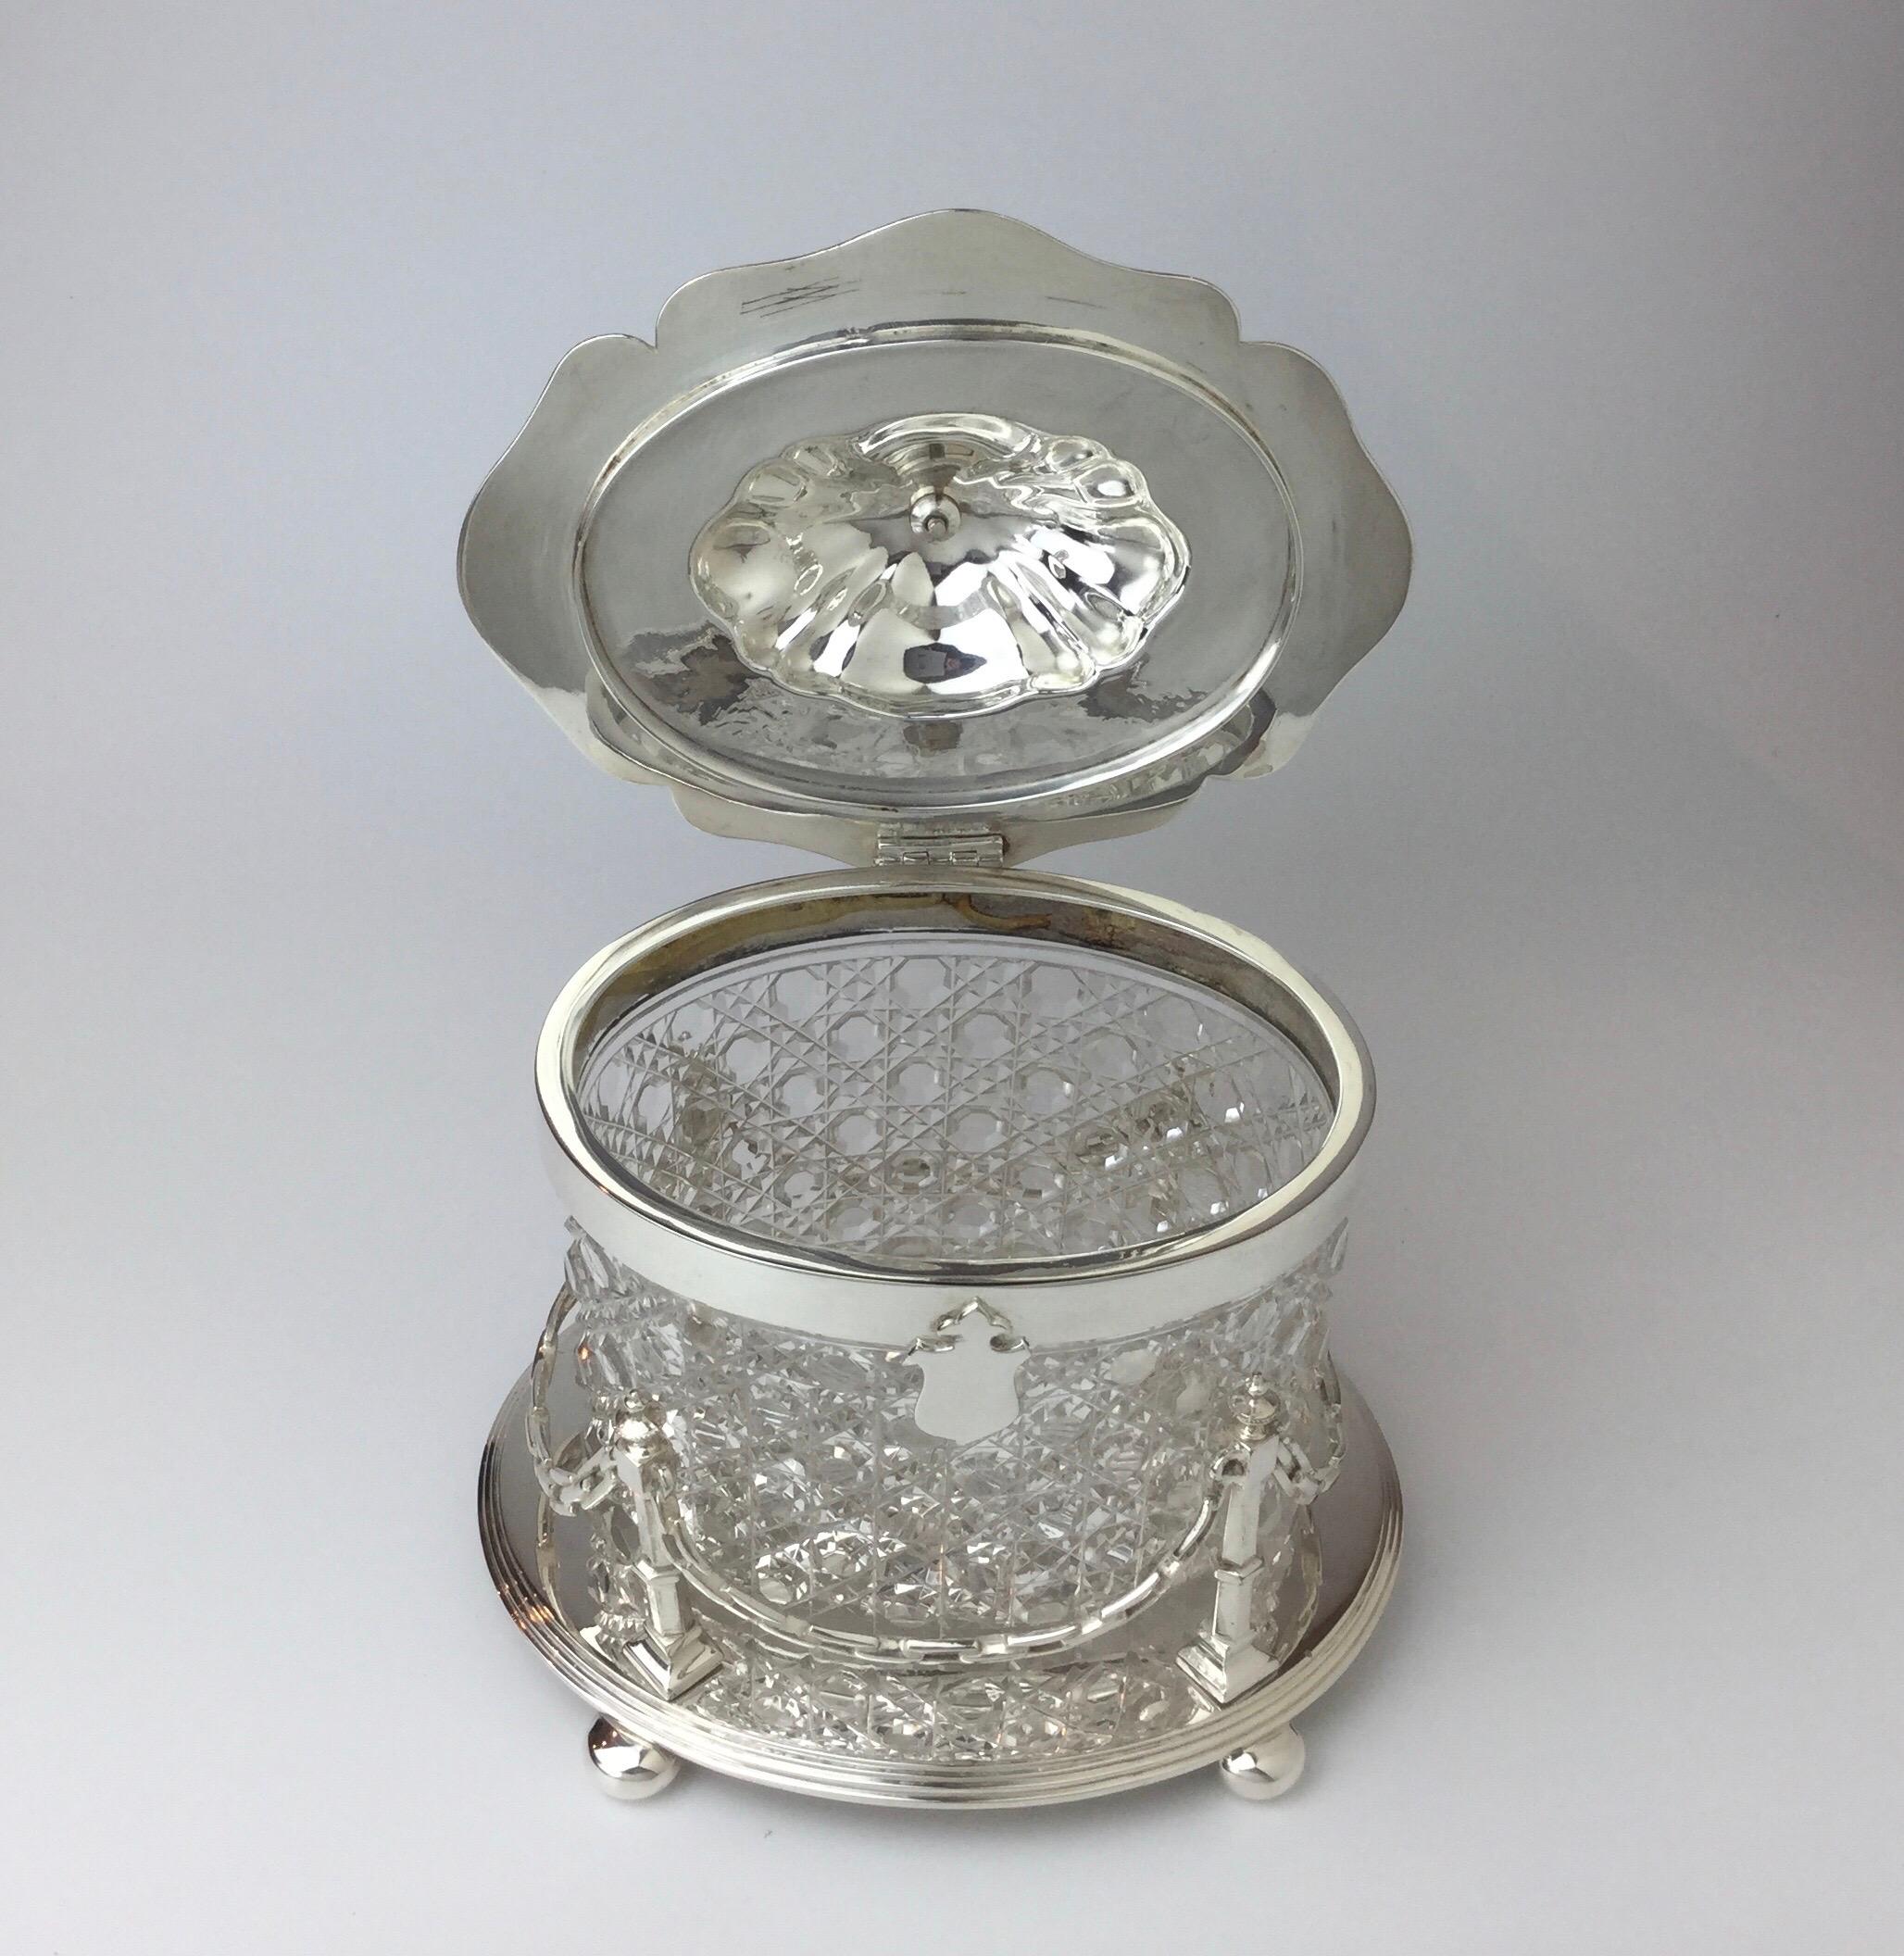 Elegant English biscuit box with cut glass insert. The lid with a tapered finial handle and the body with elongated chain and post design. The oval stepped base resting on four bun feet.